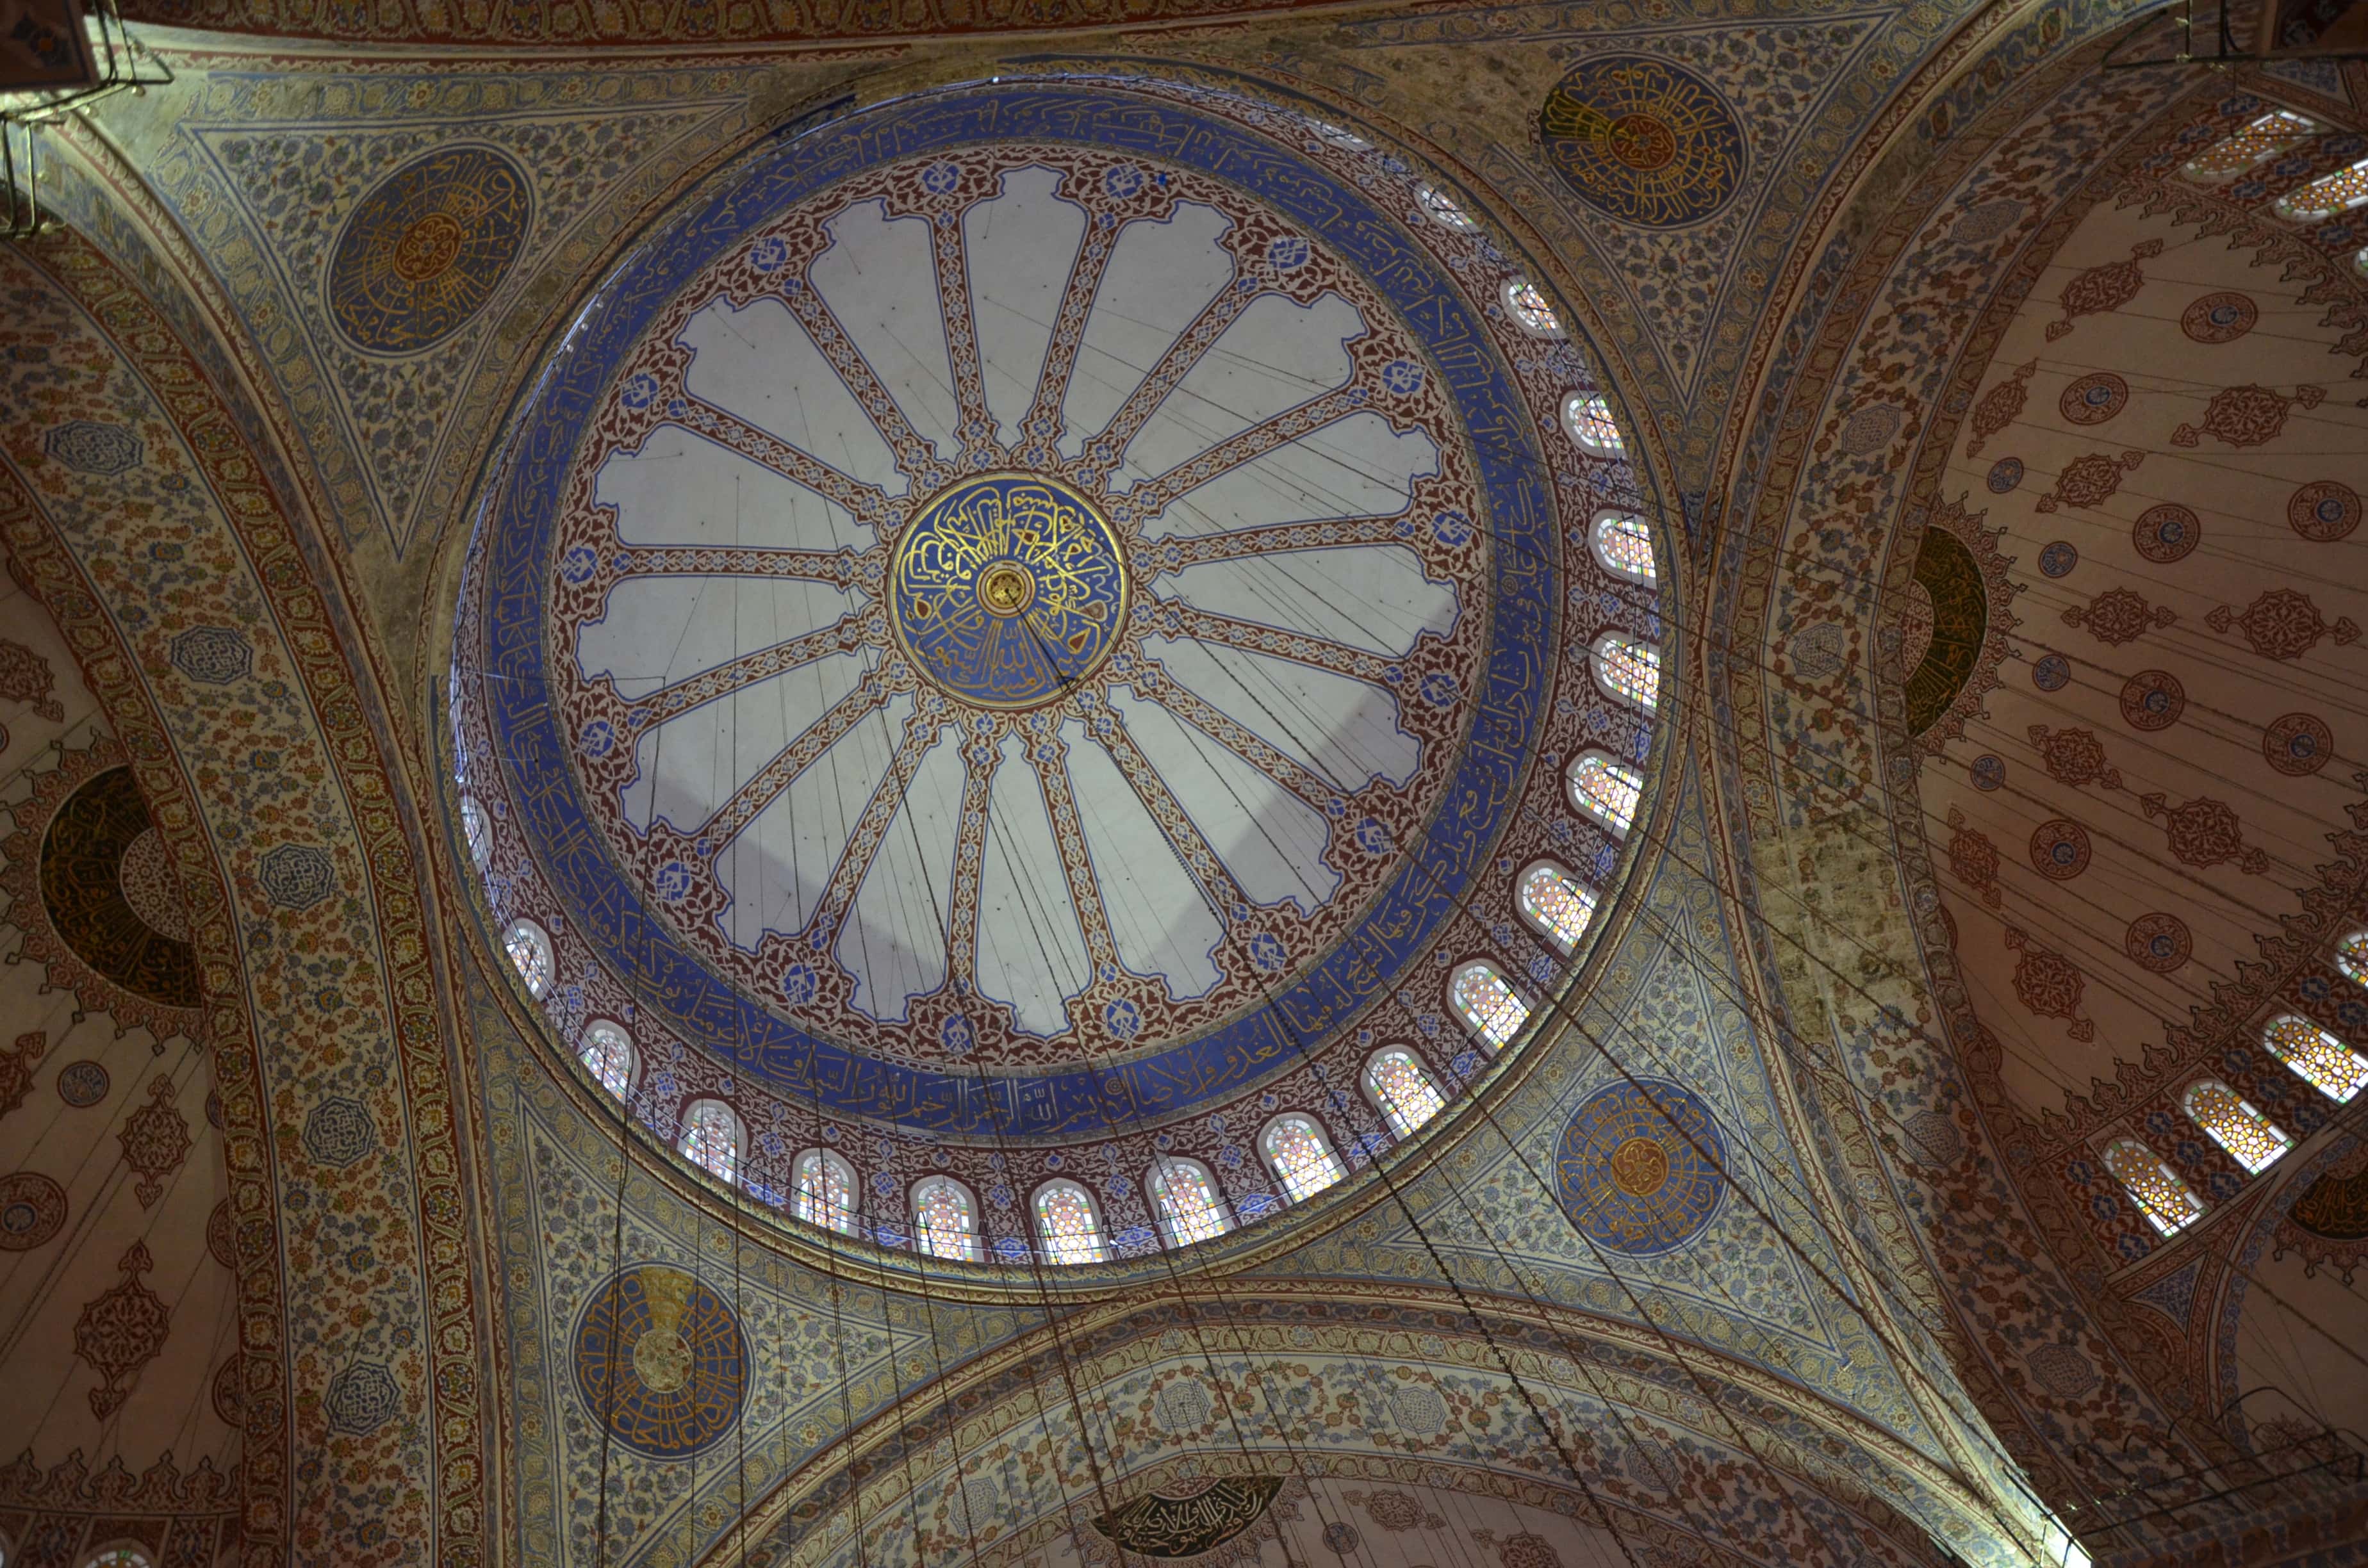 Dome of the Sultan Ahmet Camii (Blue Mosque) in Fatih, Istanbul, Turkey